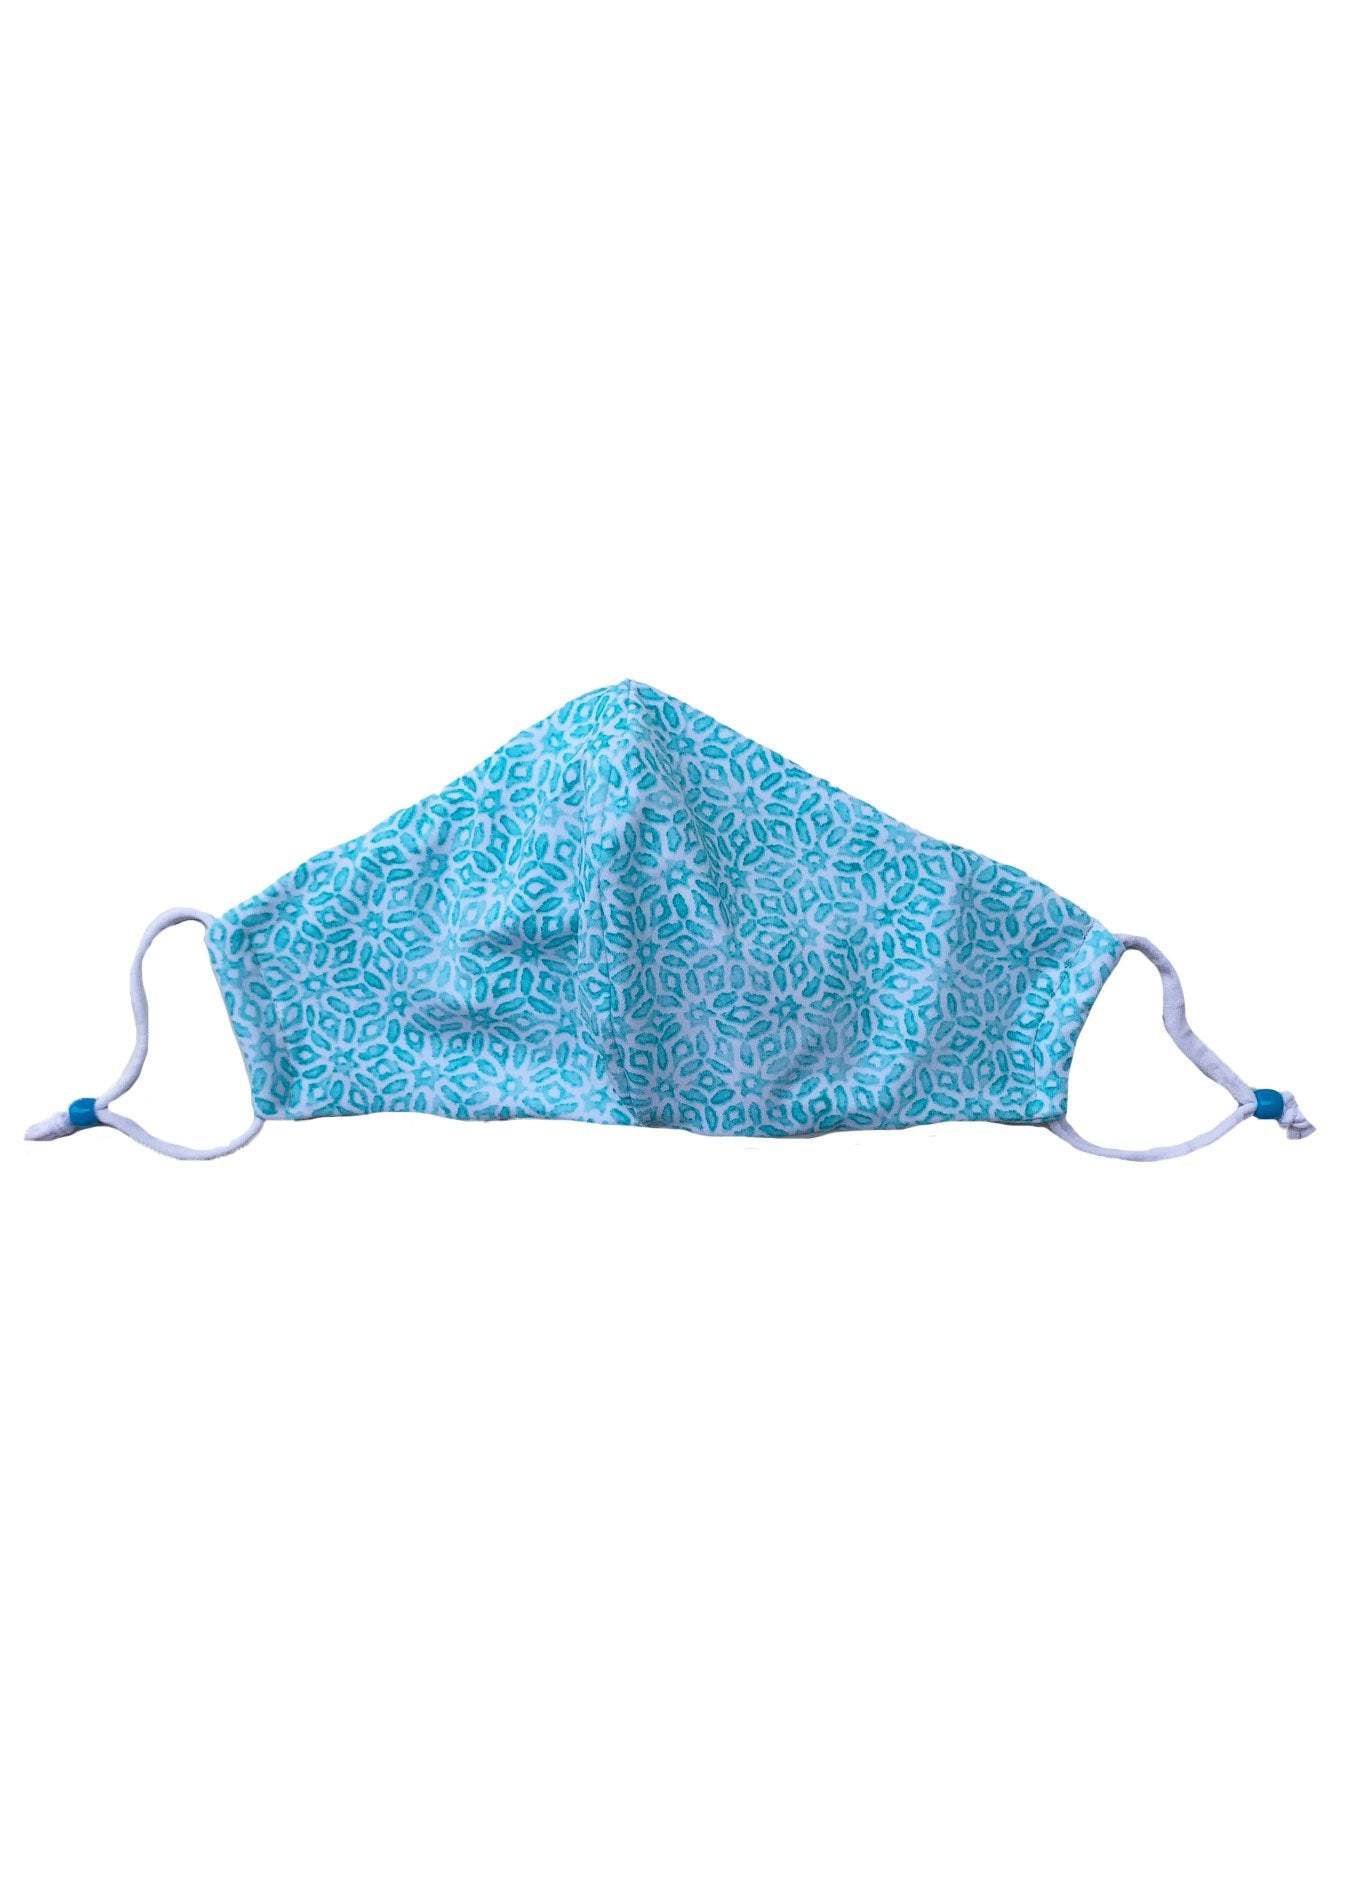 White Aqua Citrus Fitted mask. Aqua and white floral print with white adjustable straps and blue bead.